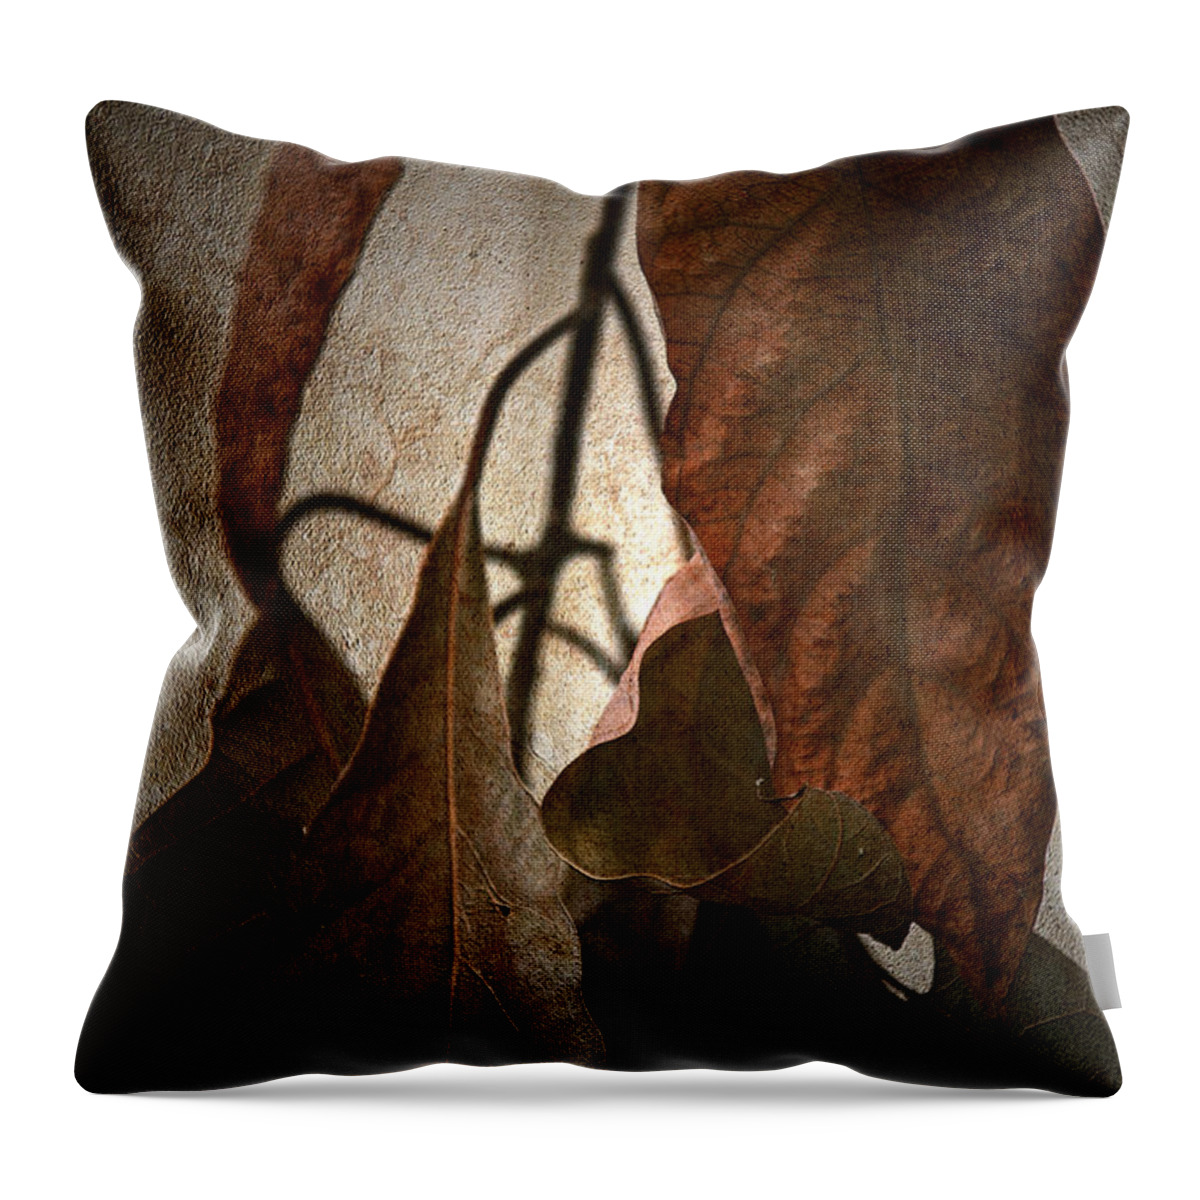 Autumn Throw Pillow featuring the photograph Comfort by Bonnie Bruno